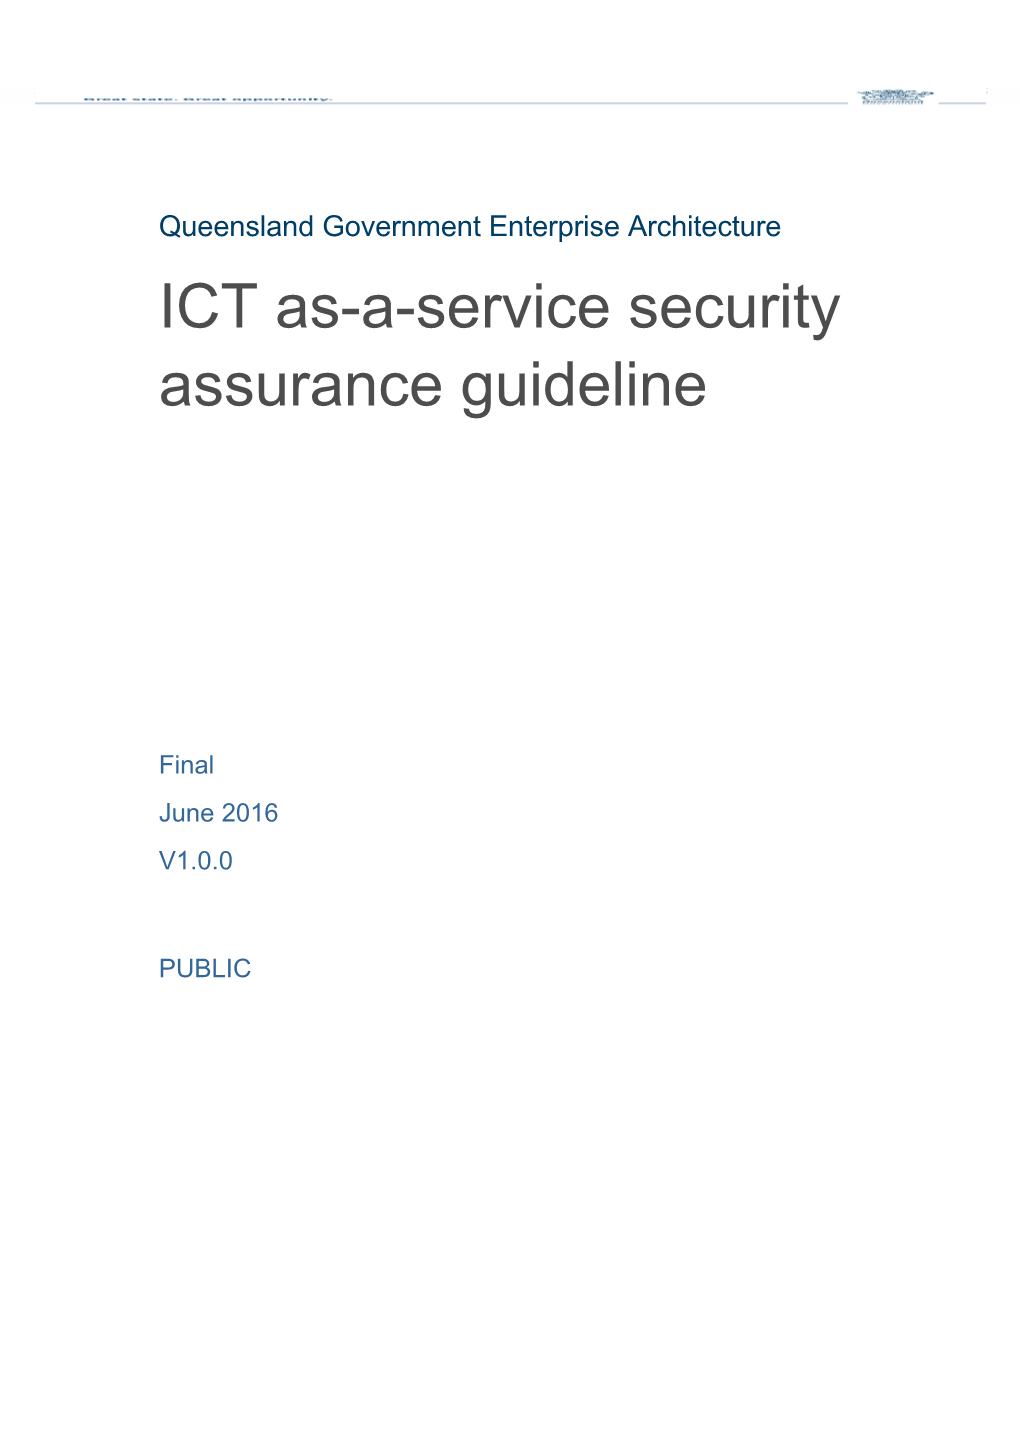 ICT As-A-Service Security Assurance Guideline